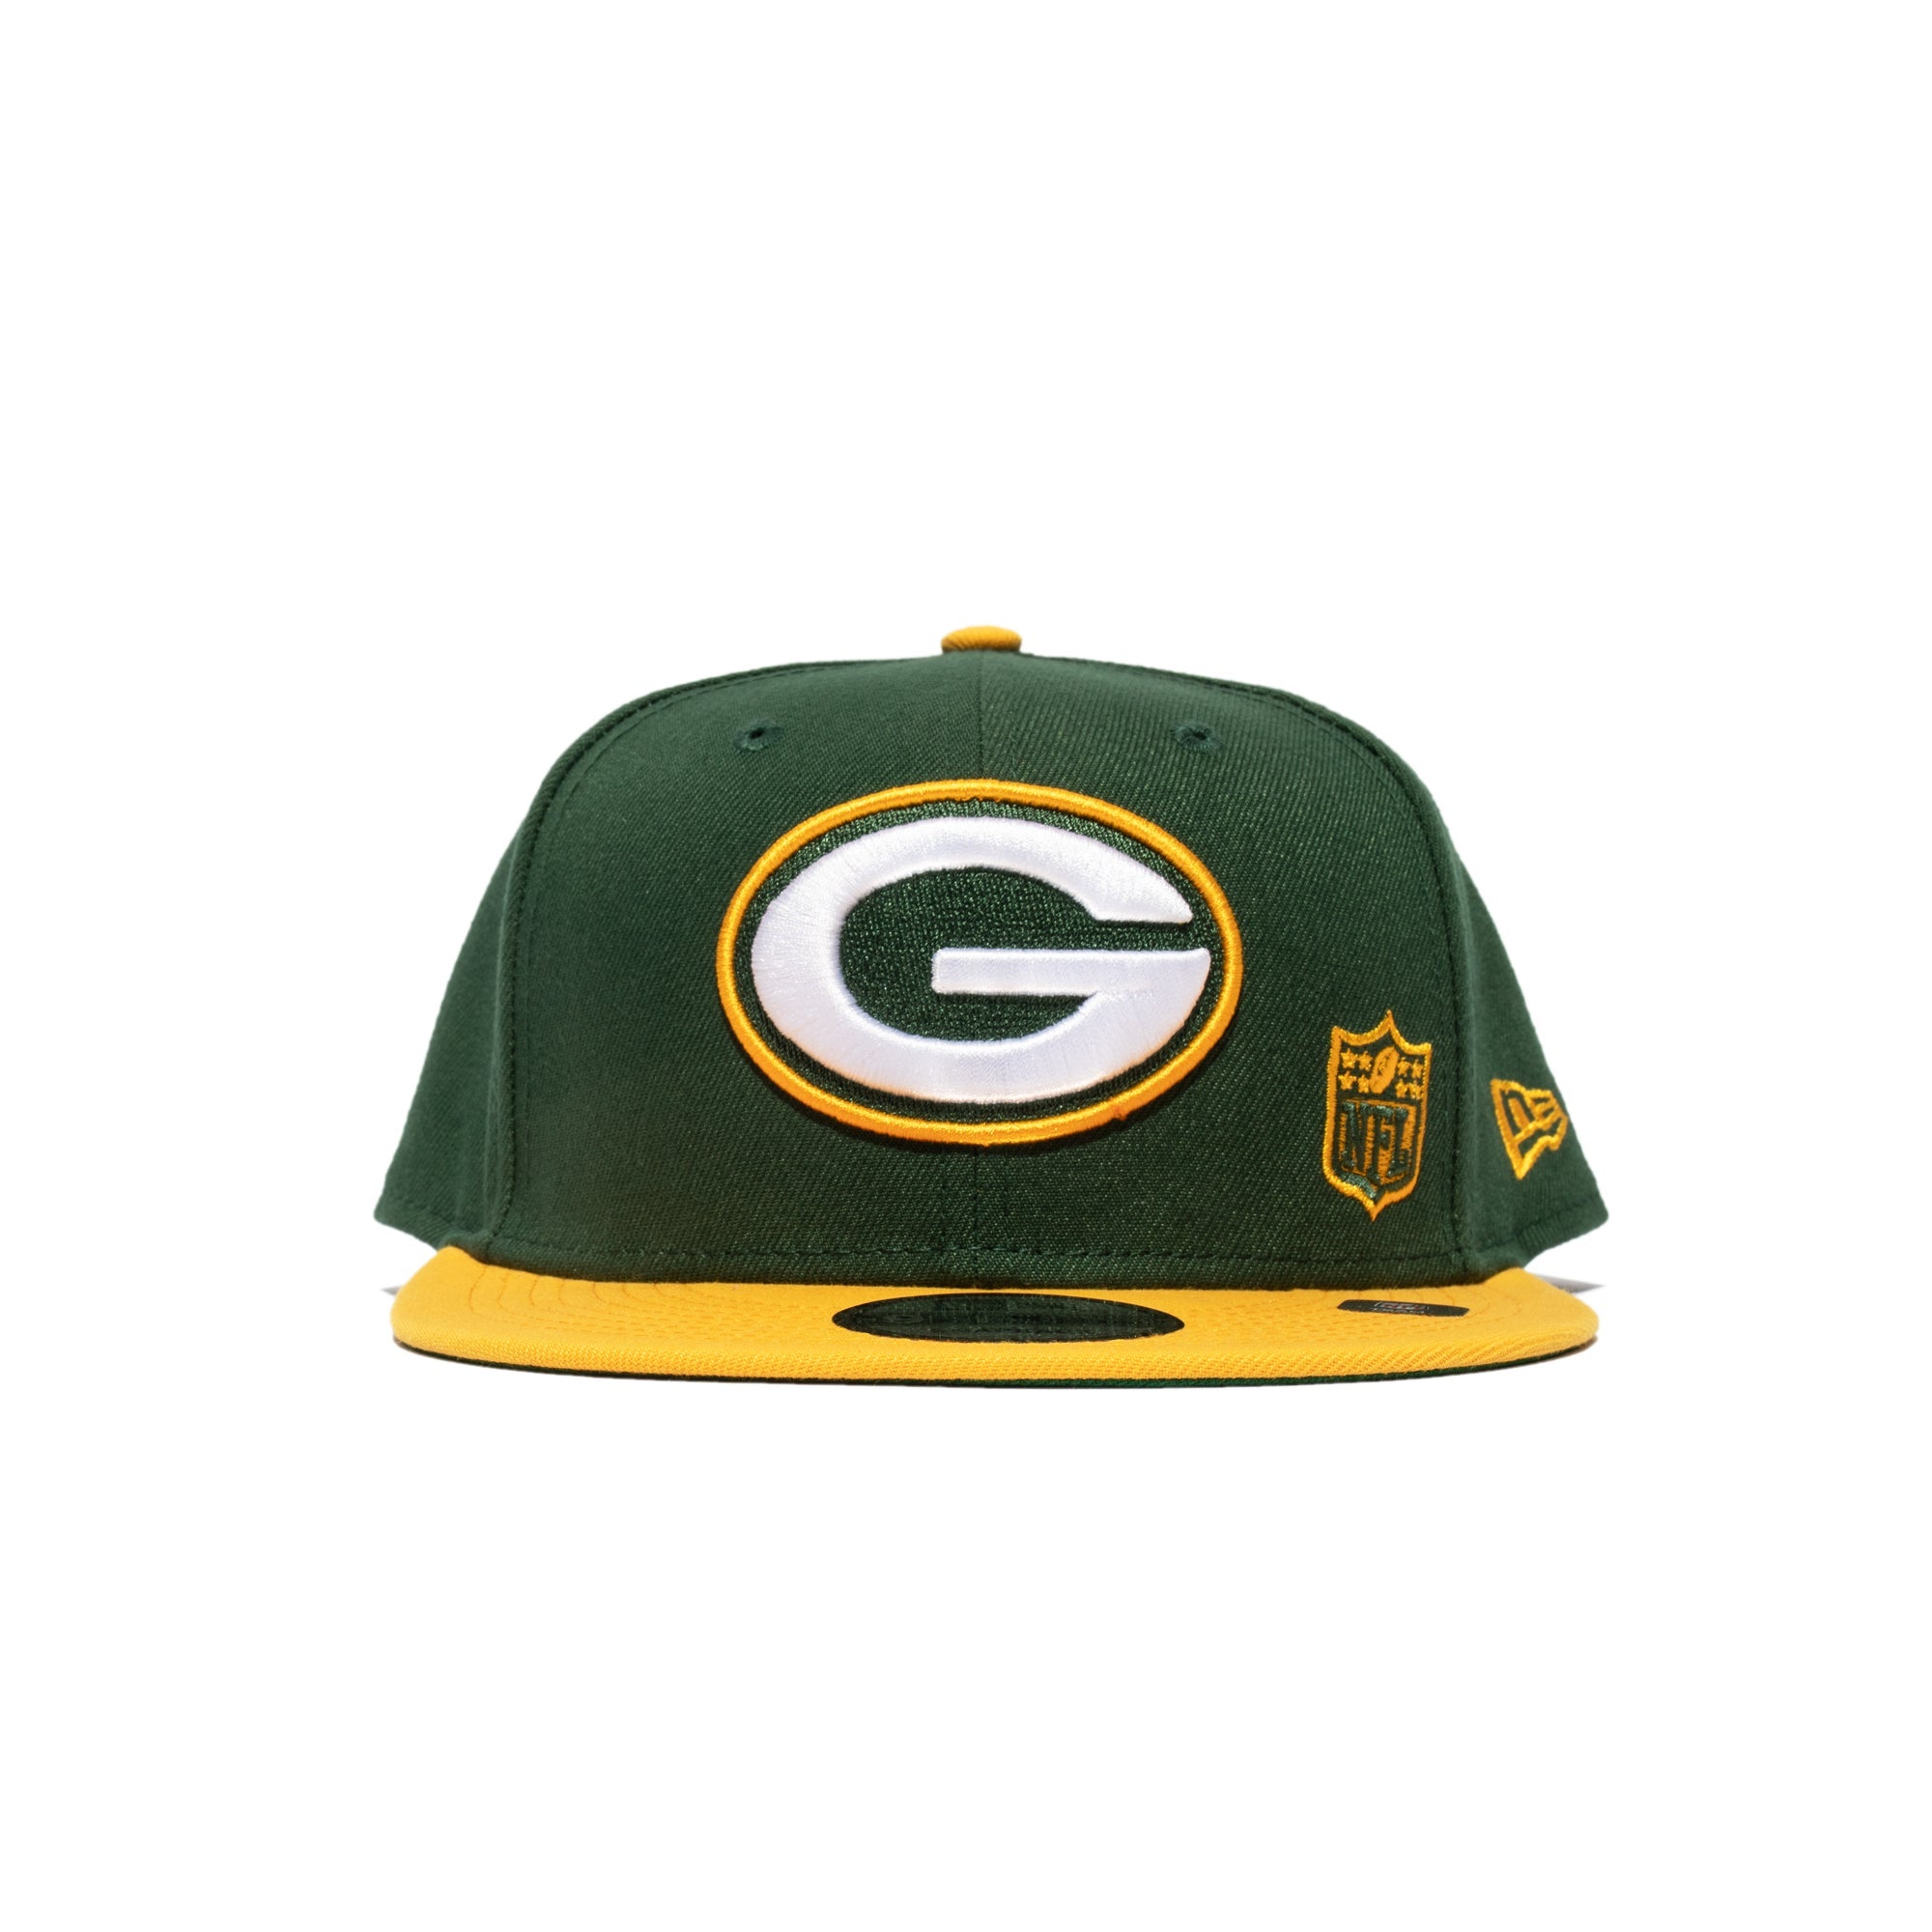 New Era Backletter Arch 9FIFTY Greenbay Packers Snapback Hat